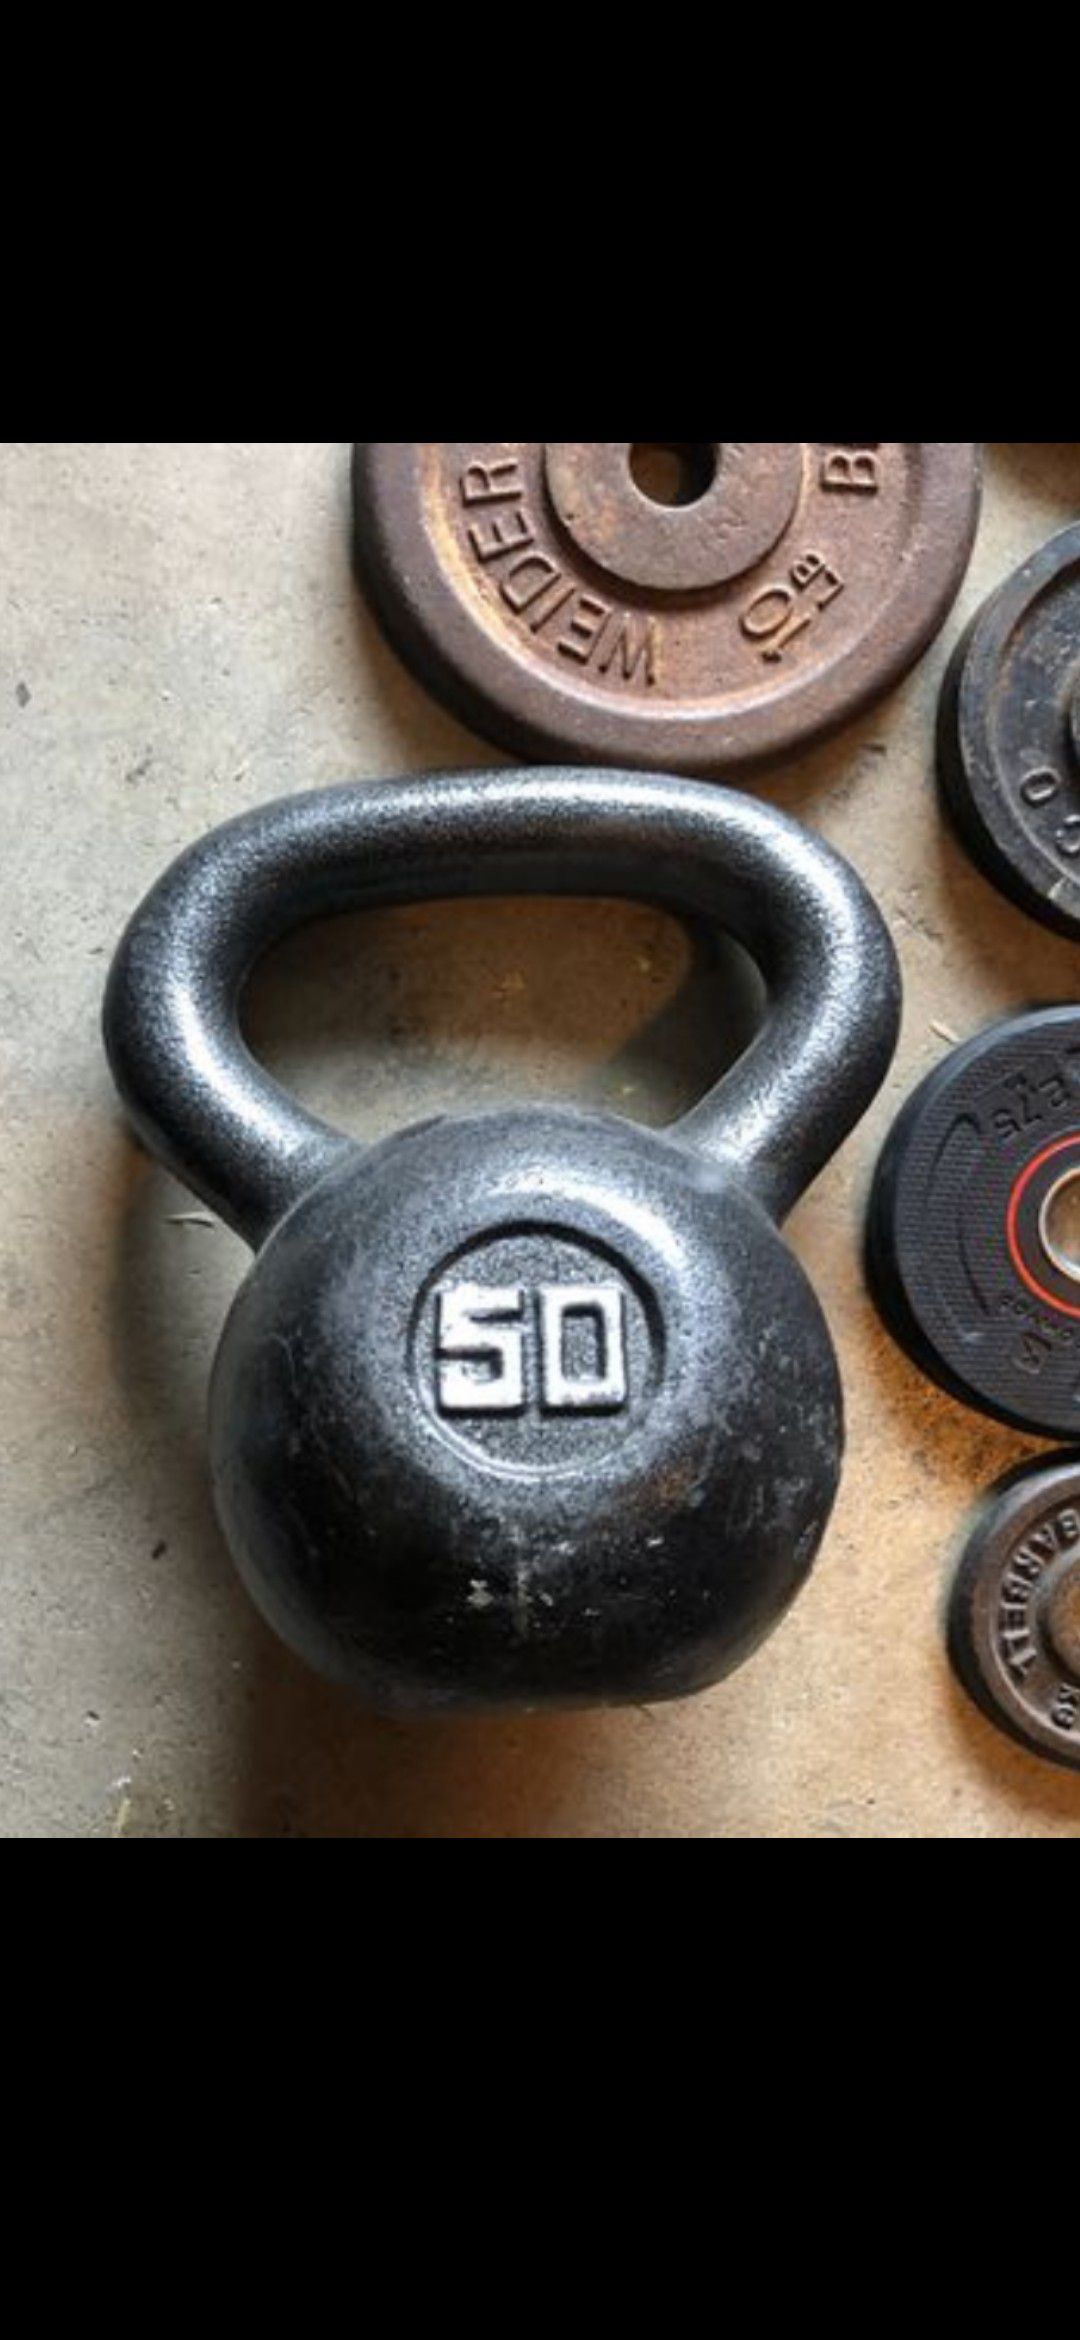 50 pound kettle bell weight